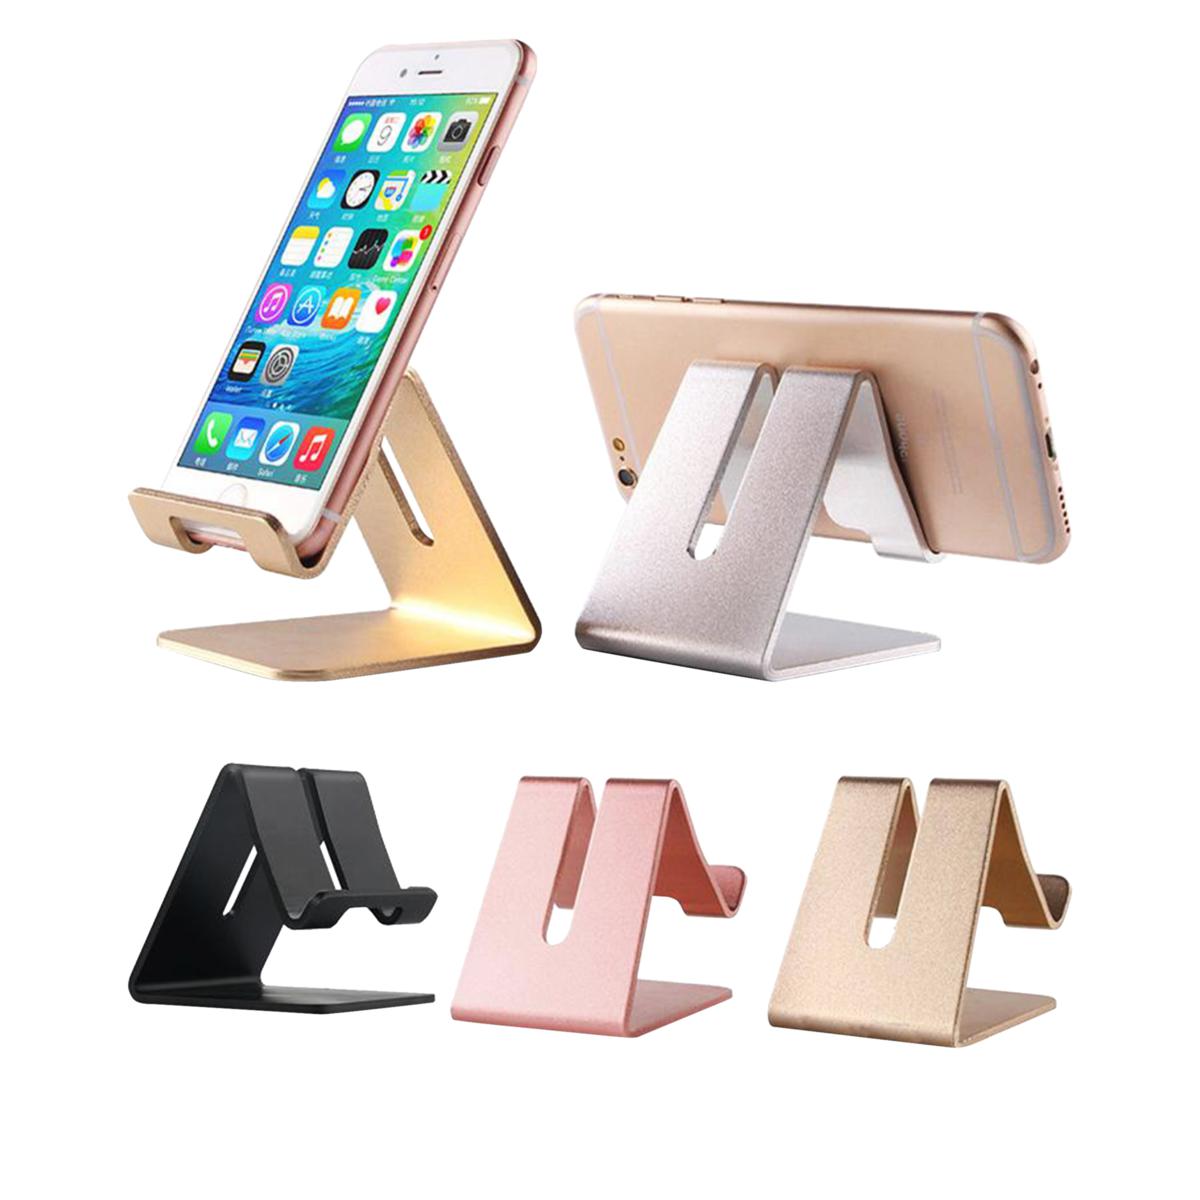 Aluminum Phone Stand - 2 Pack Black and Rose Gold